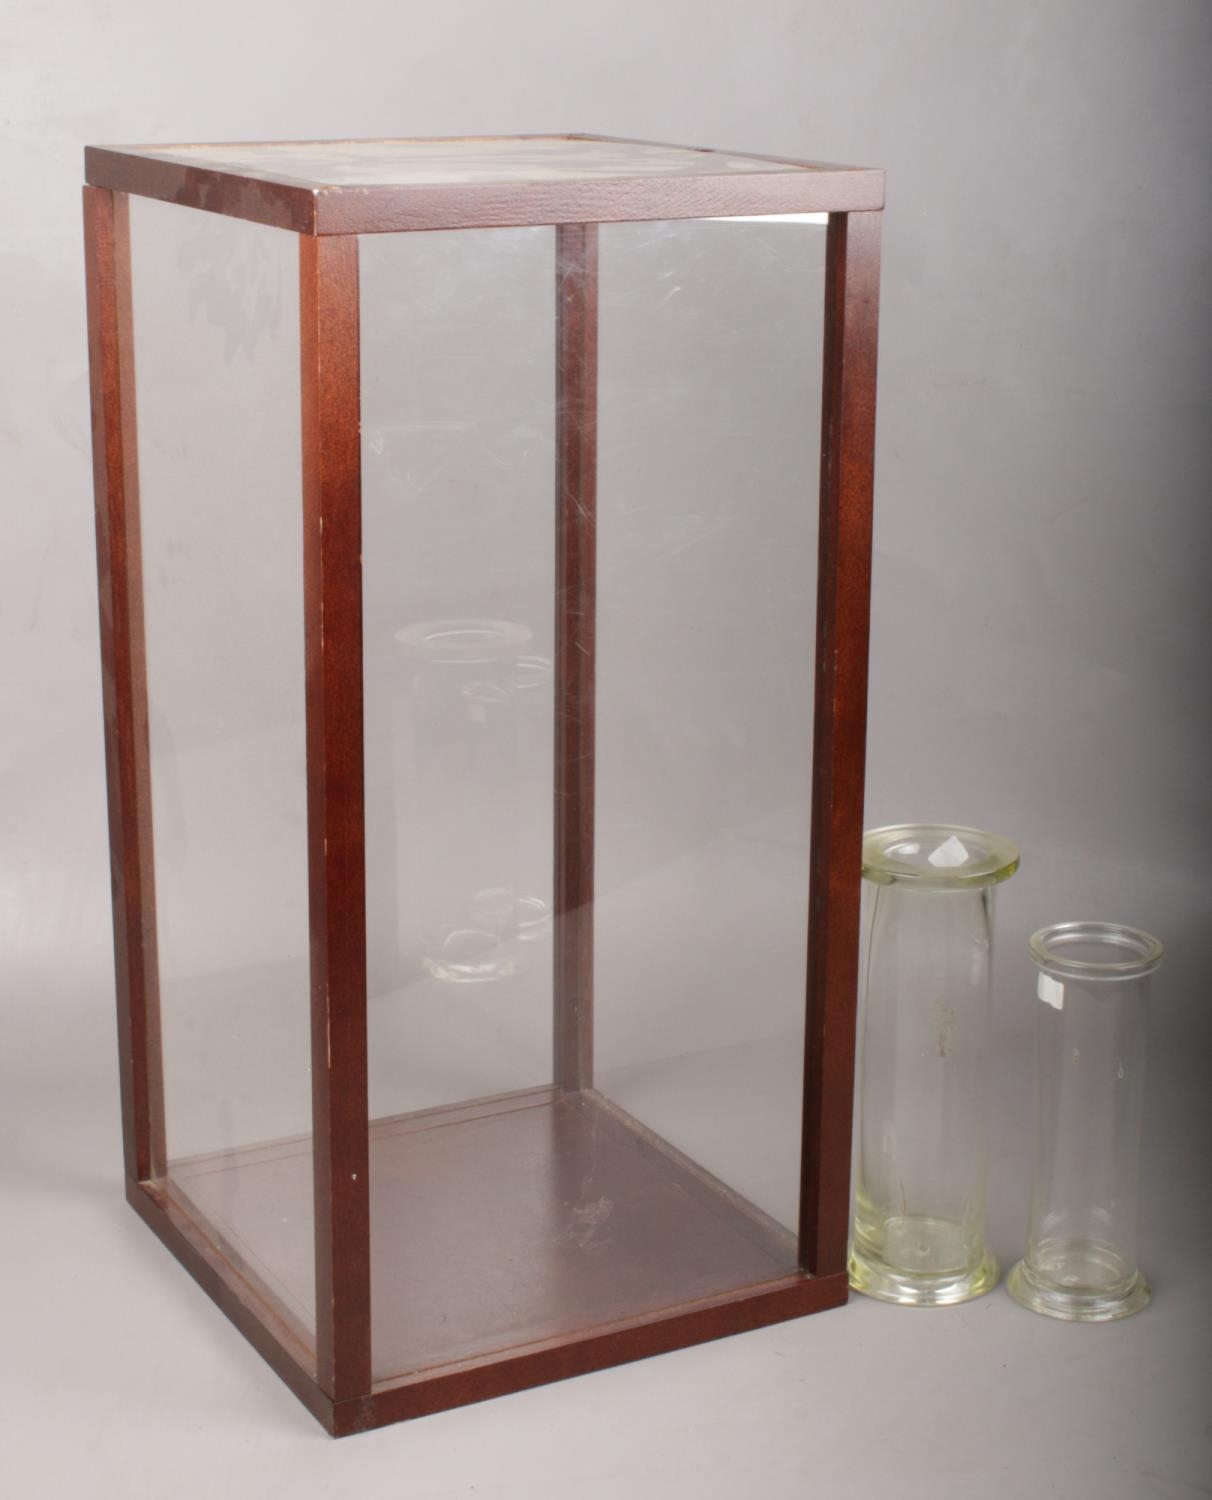 A Perspex display case together with two glass specimen jars. H:50.5cm, W:25cm.